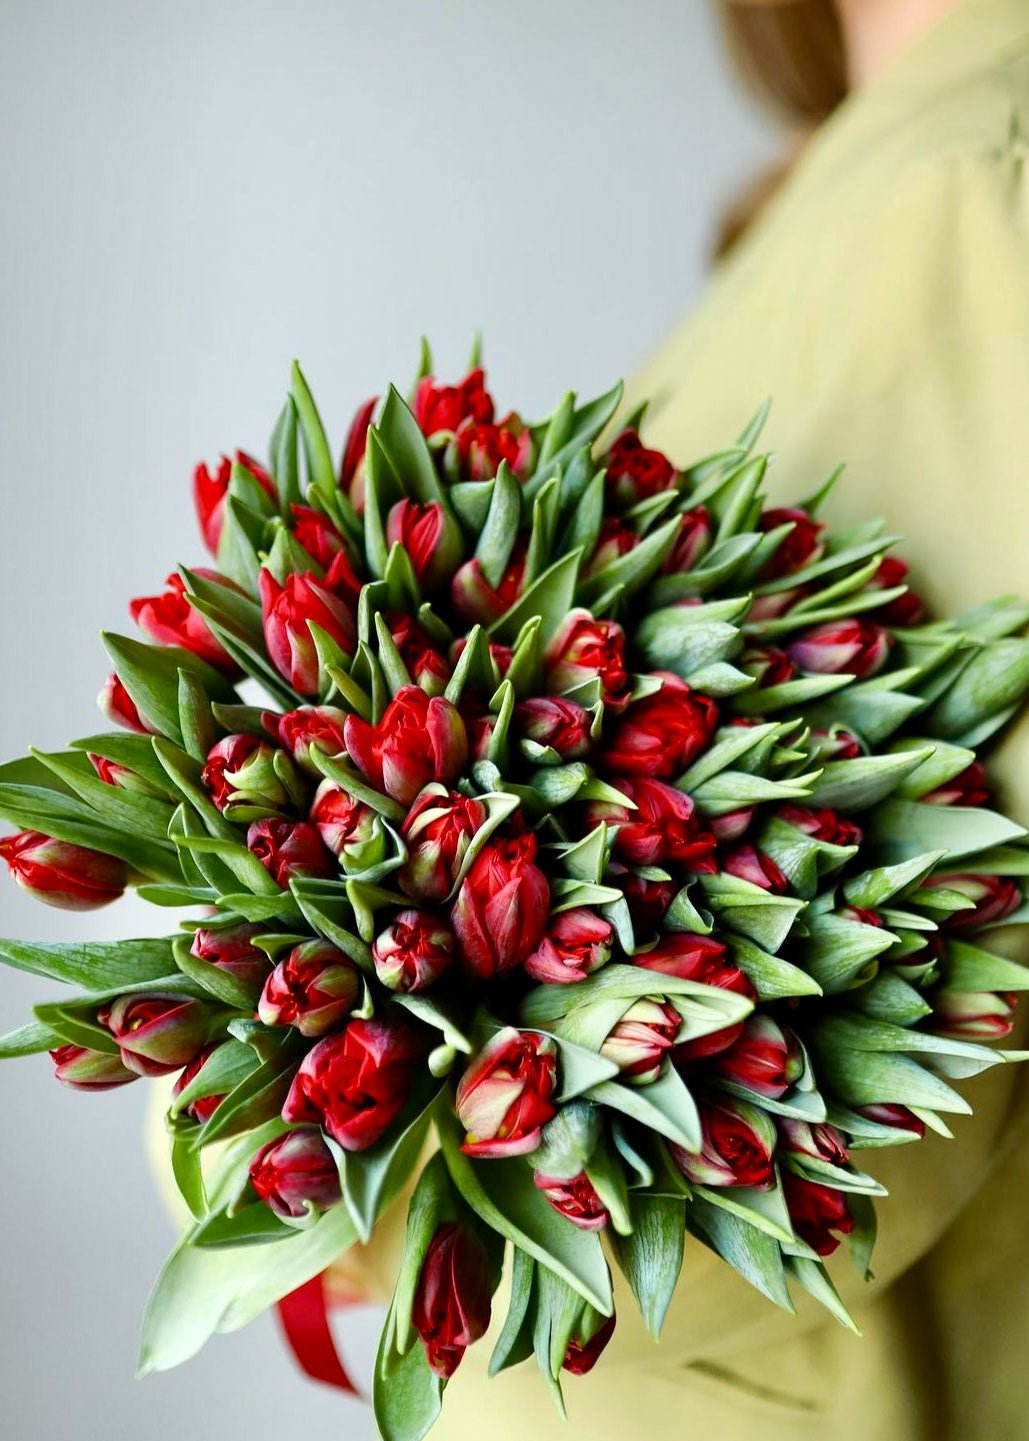 NO. 39. Gorgeous Red Tulips Bouquet